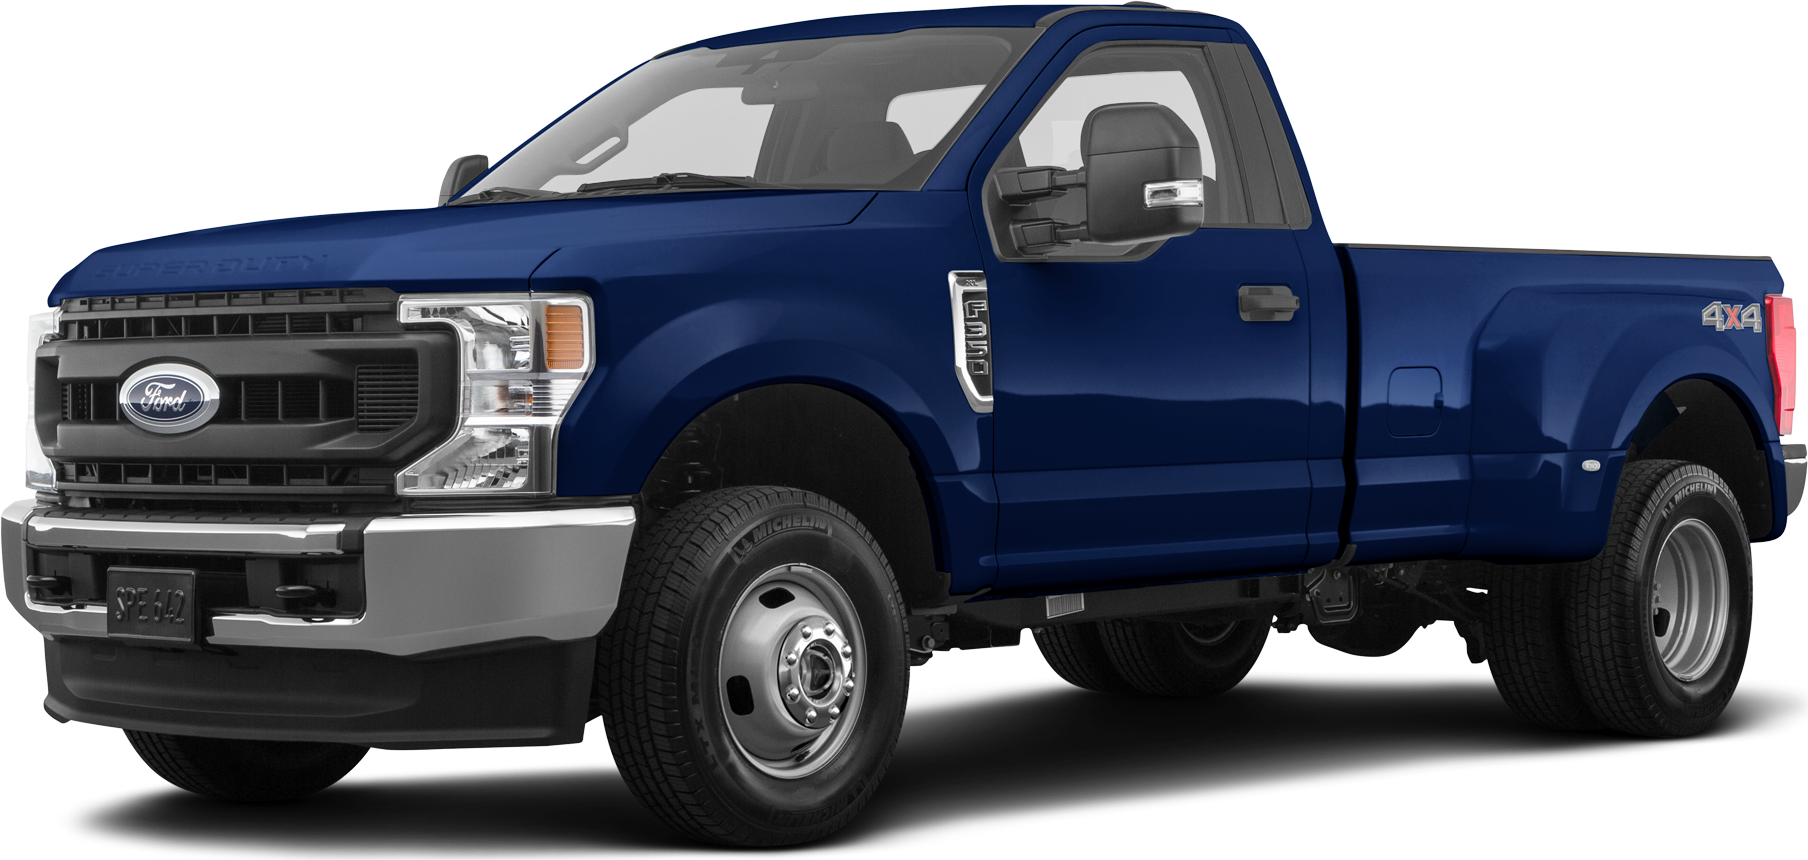 New 2022 Ford F350 Super Duty Regular Cab Reviews, Pricing & Specs